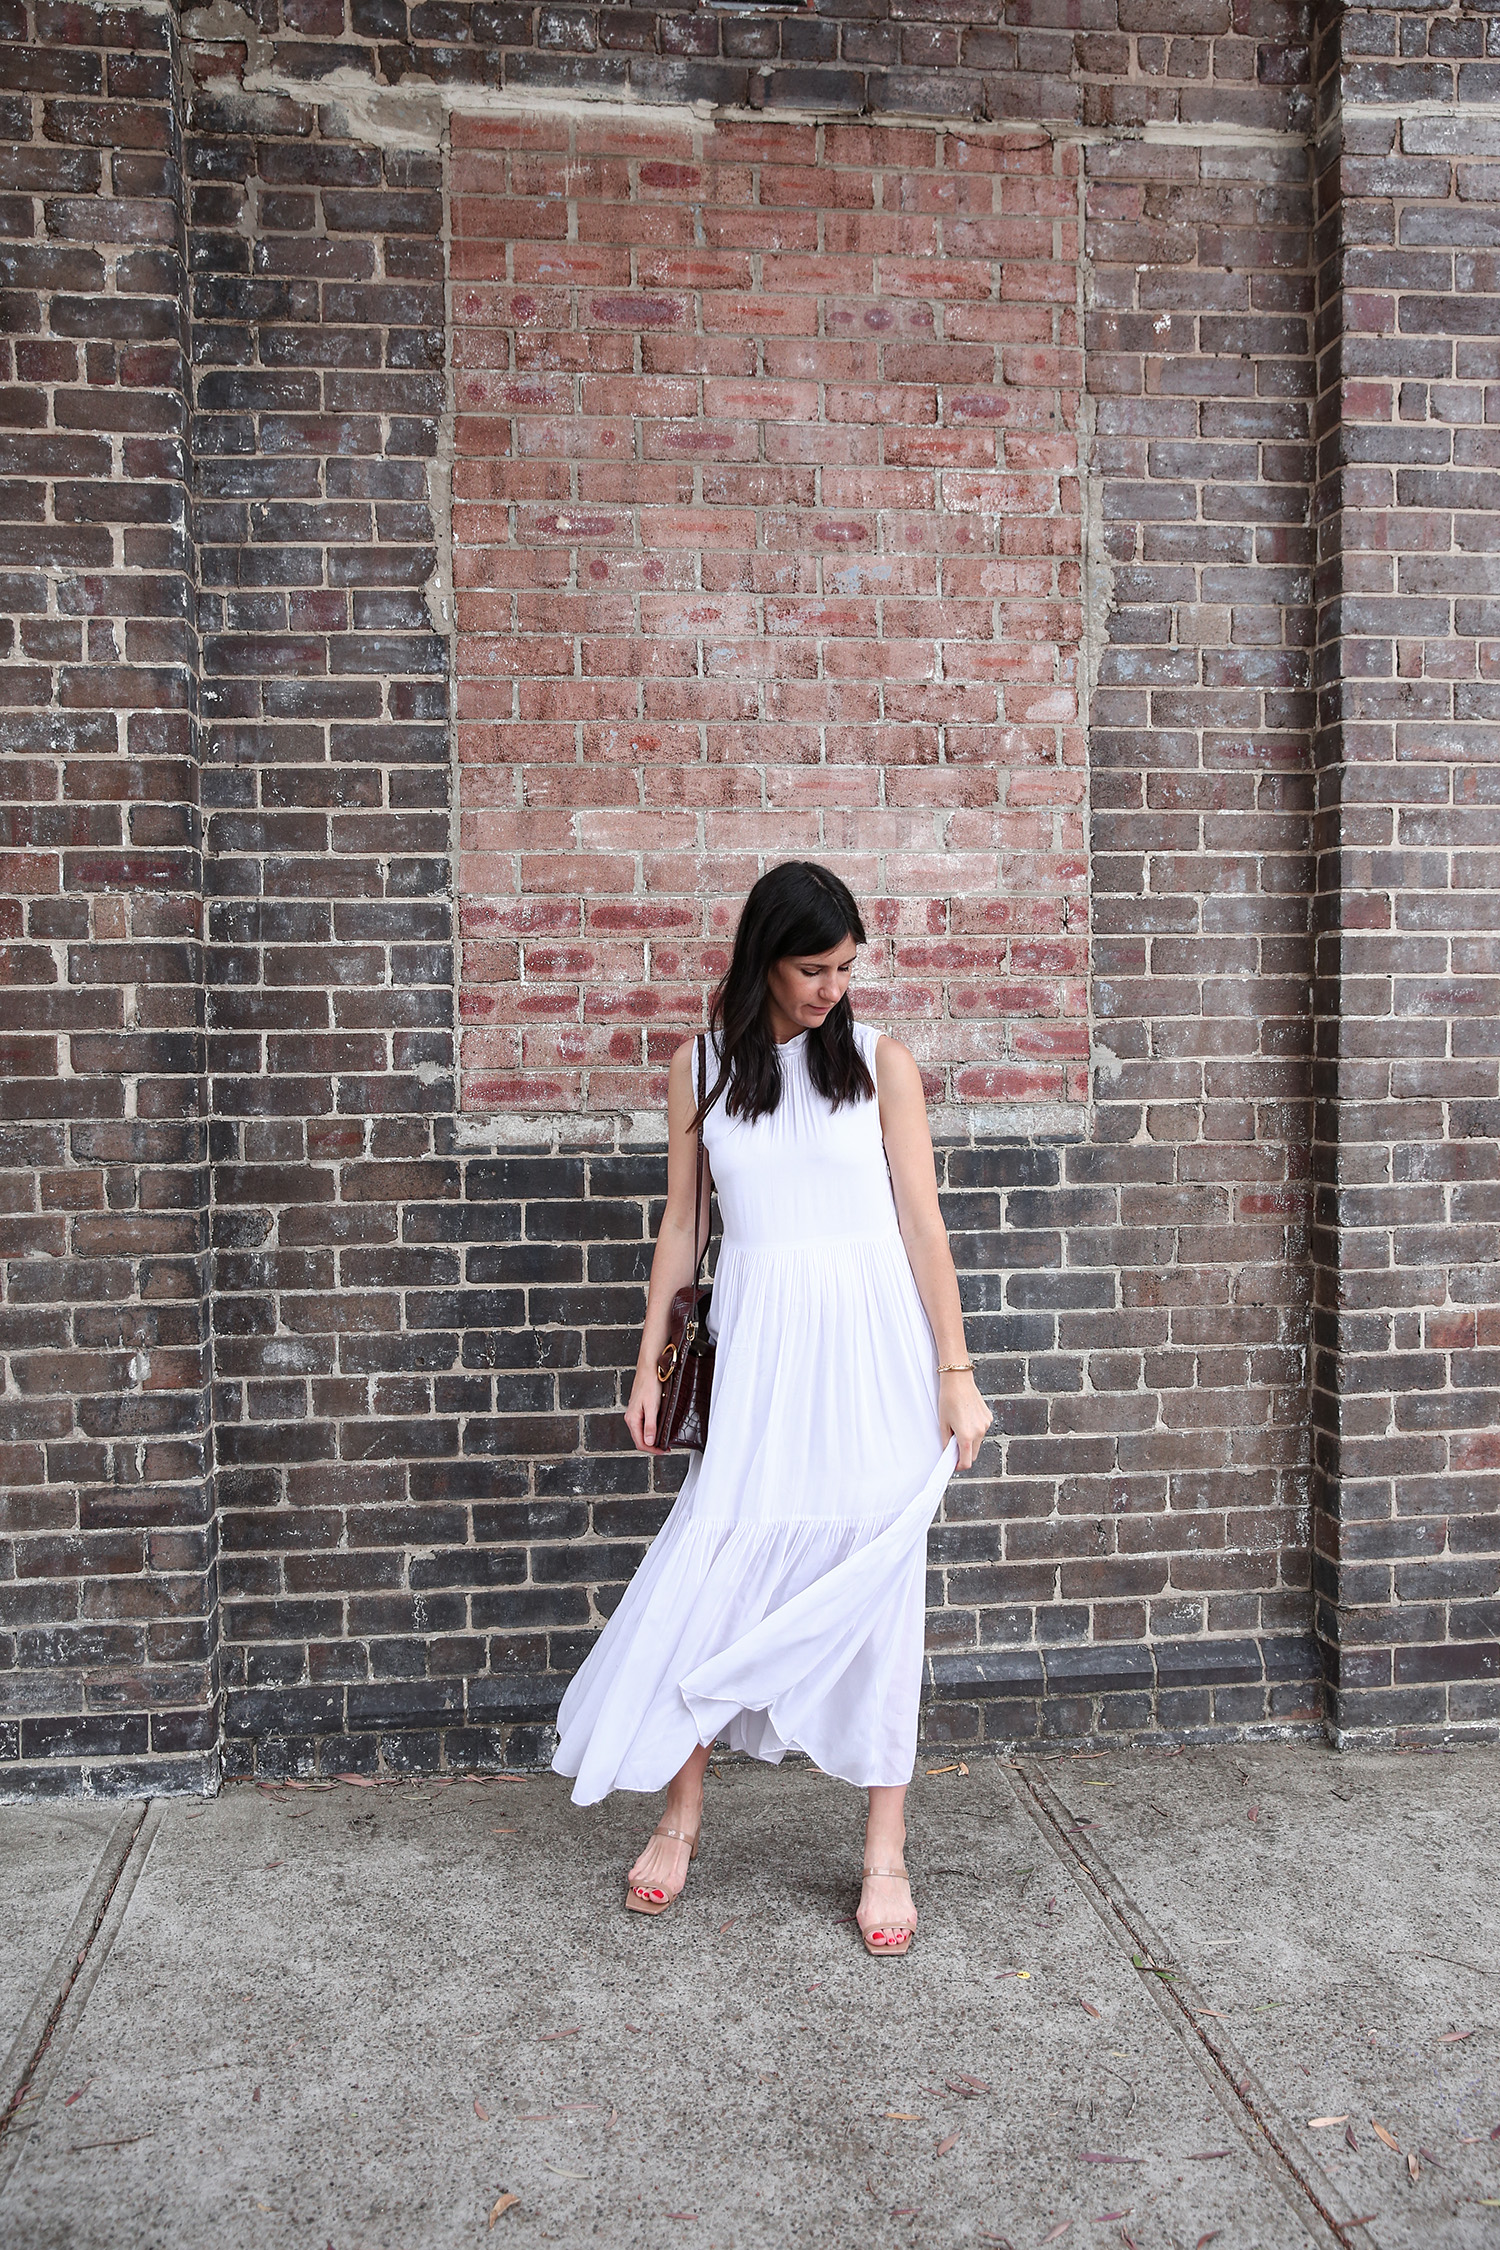 Jamie Lee of Mademoiselle wearing the Lune Resort Noni Maxi Dress and By Far Mules